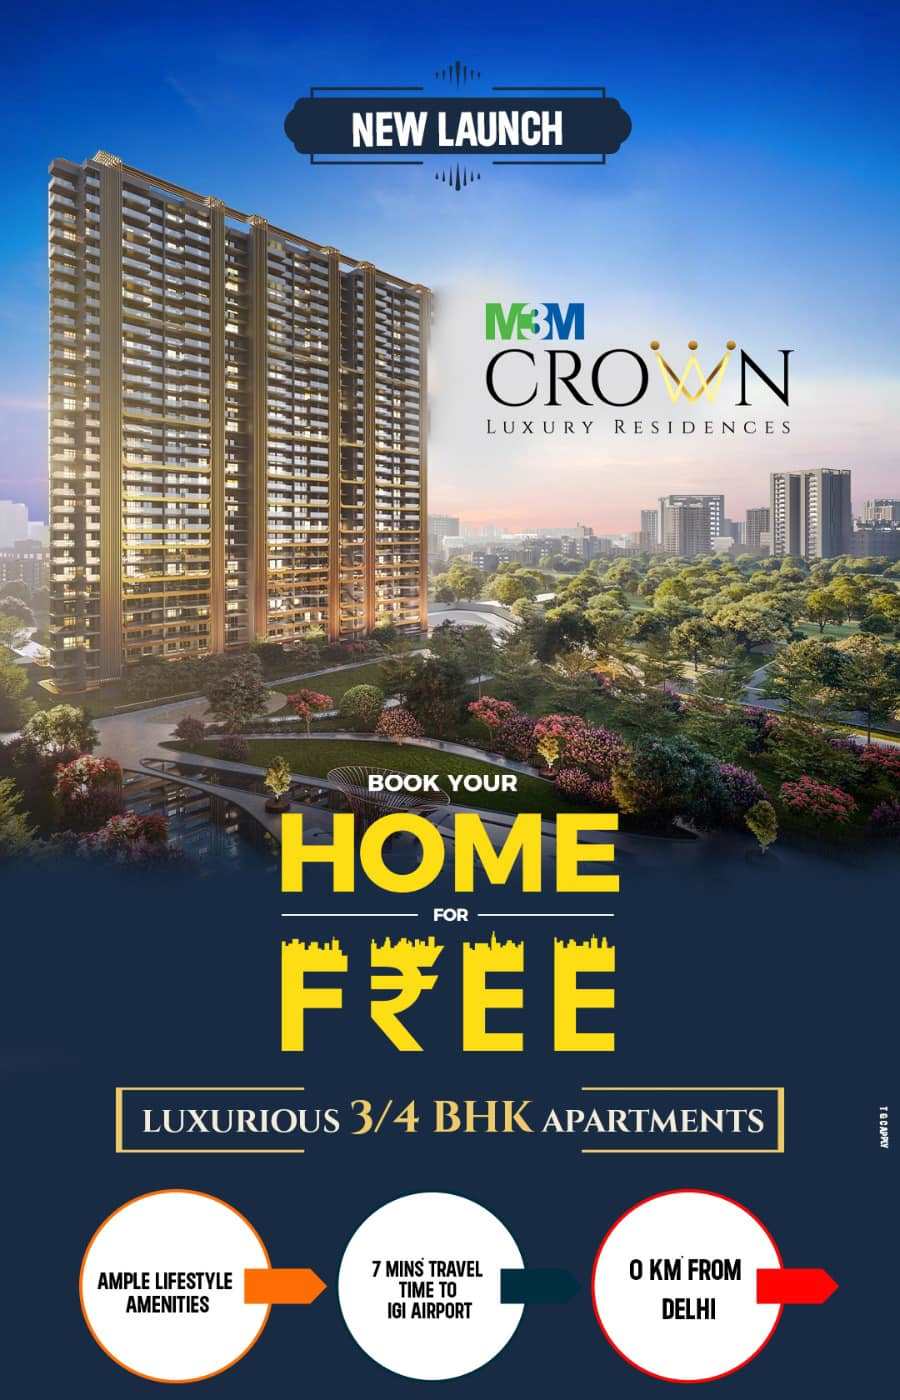 New launch at M3M Crown in Dwarka Expressway, Gurgaon